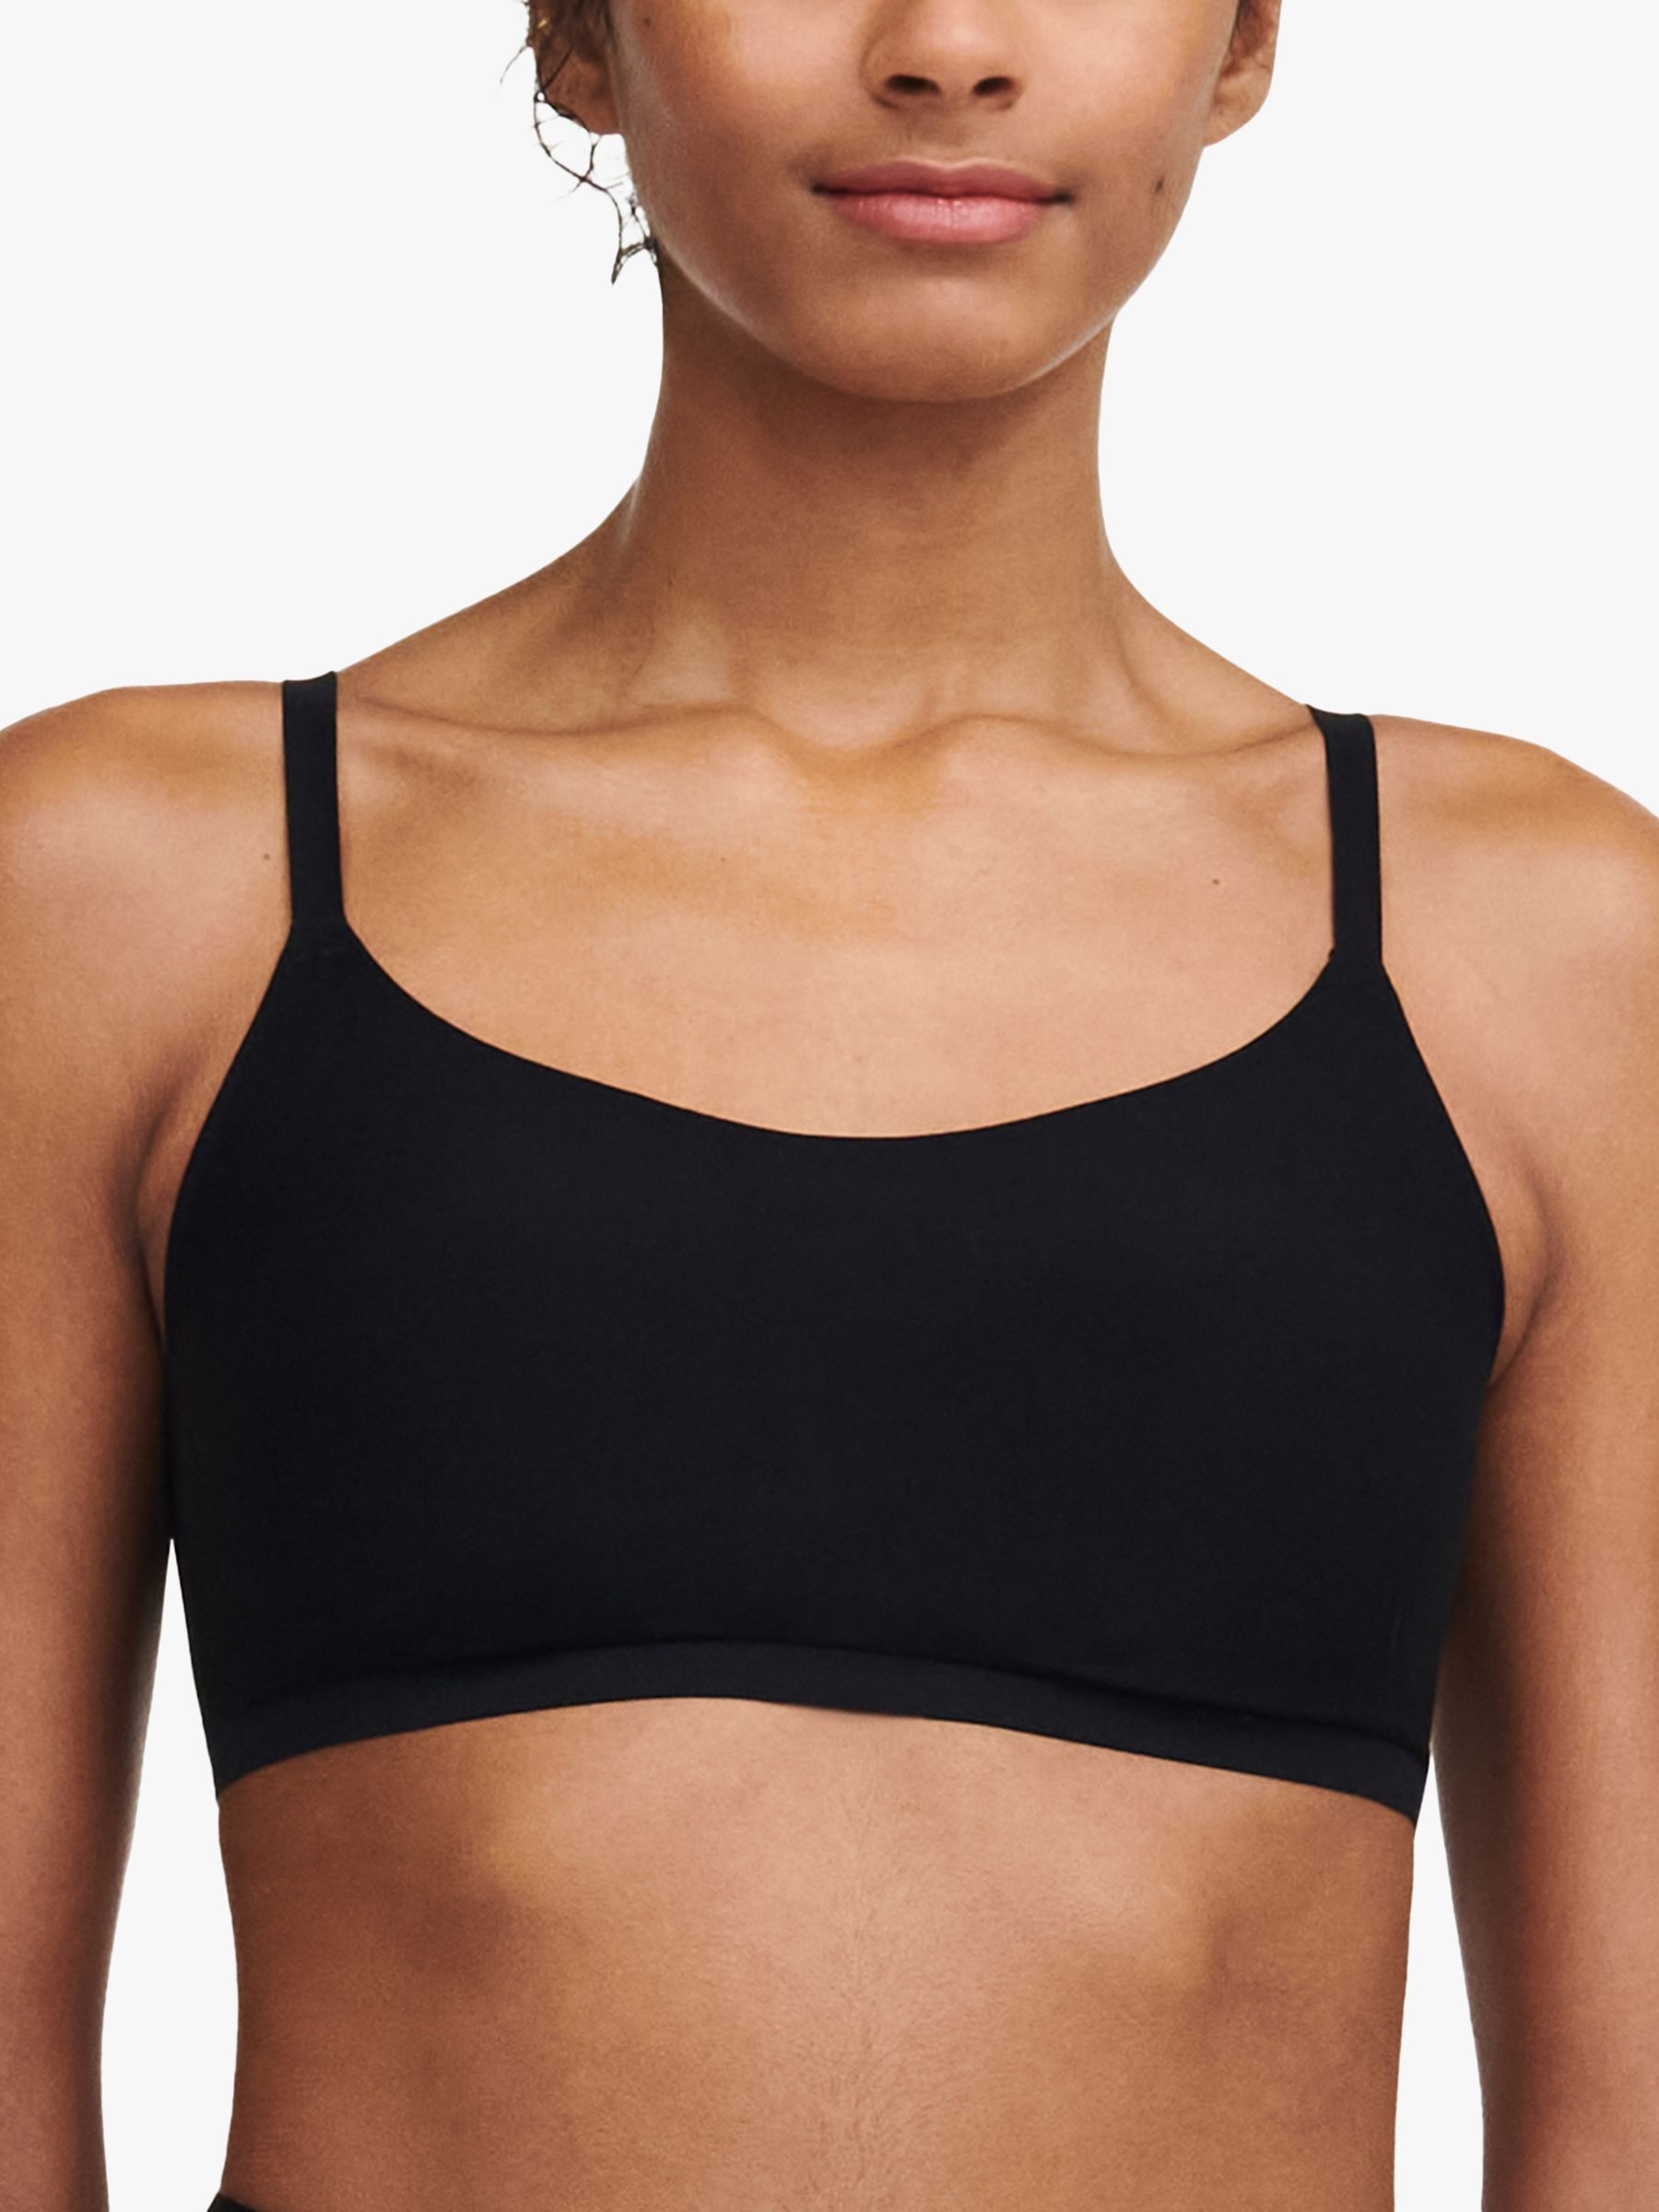 Chantelle Soft Stretch Padded Bralette, Nude at John Lewis & Partners